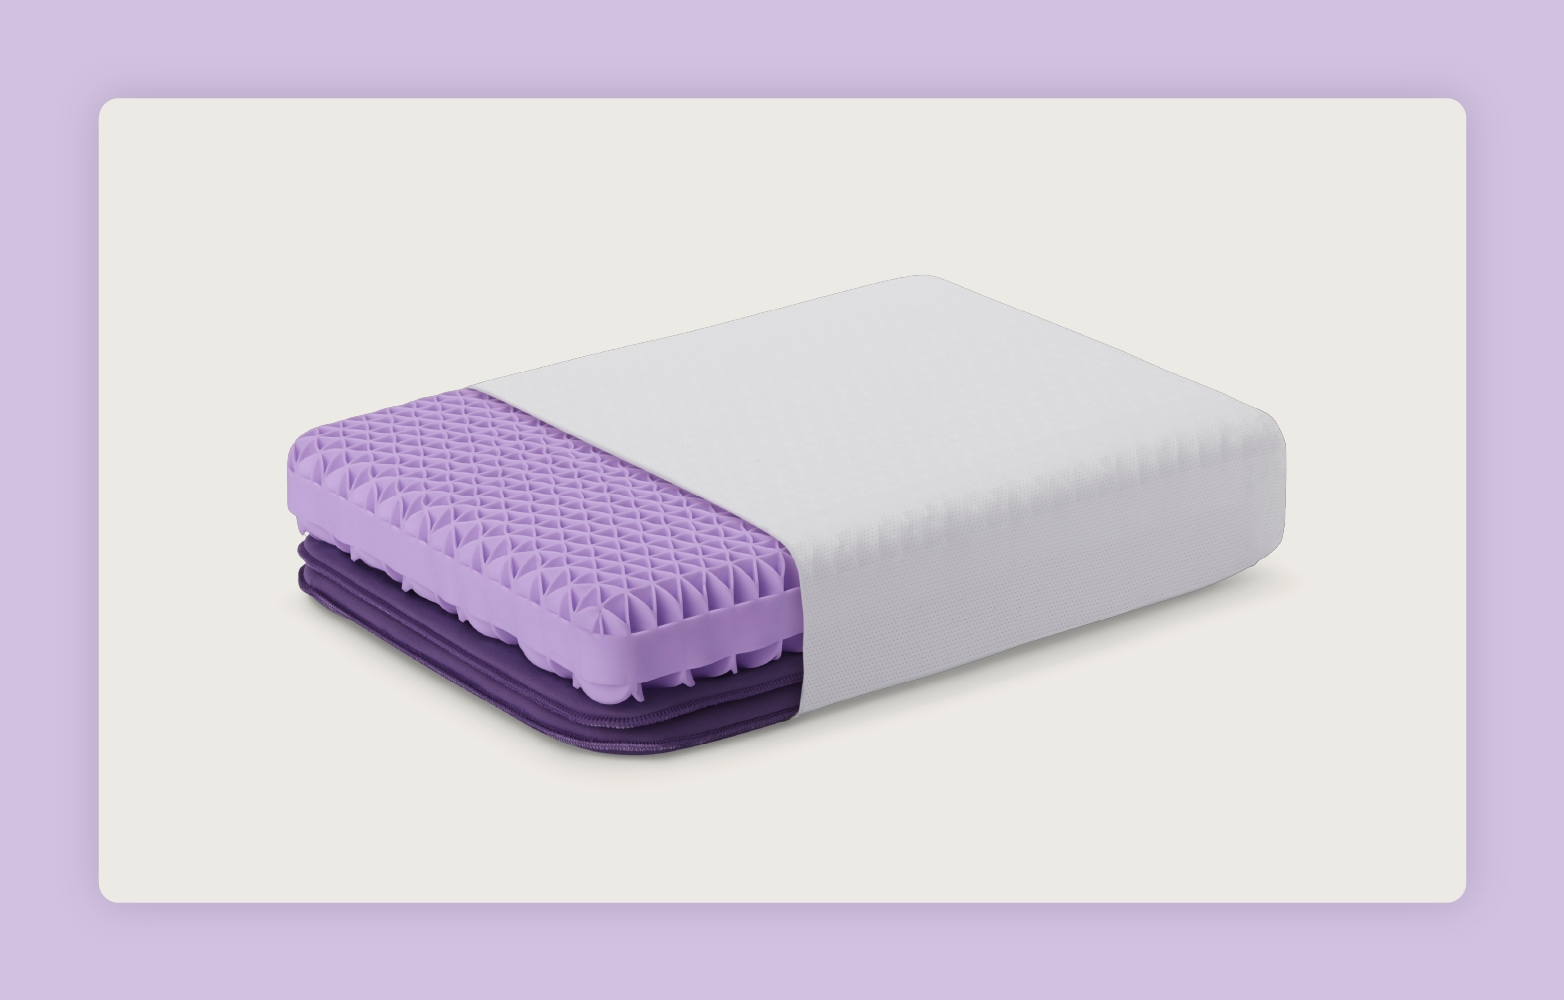 The Purple Pillow® partially shows the GelFlex® Grid and Purple Pillow Boosters.